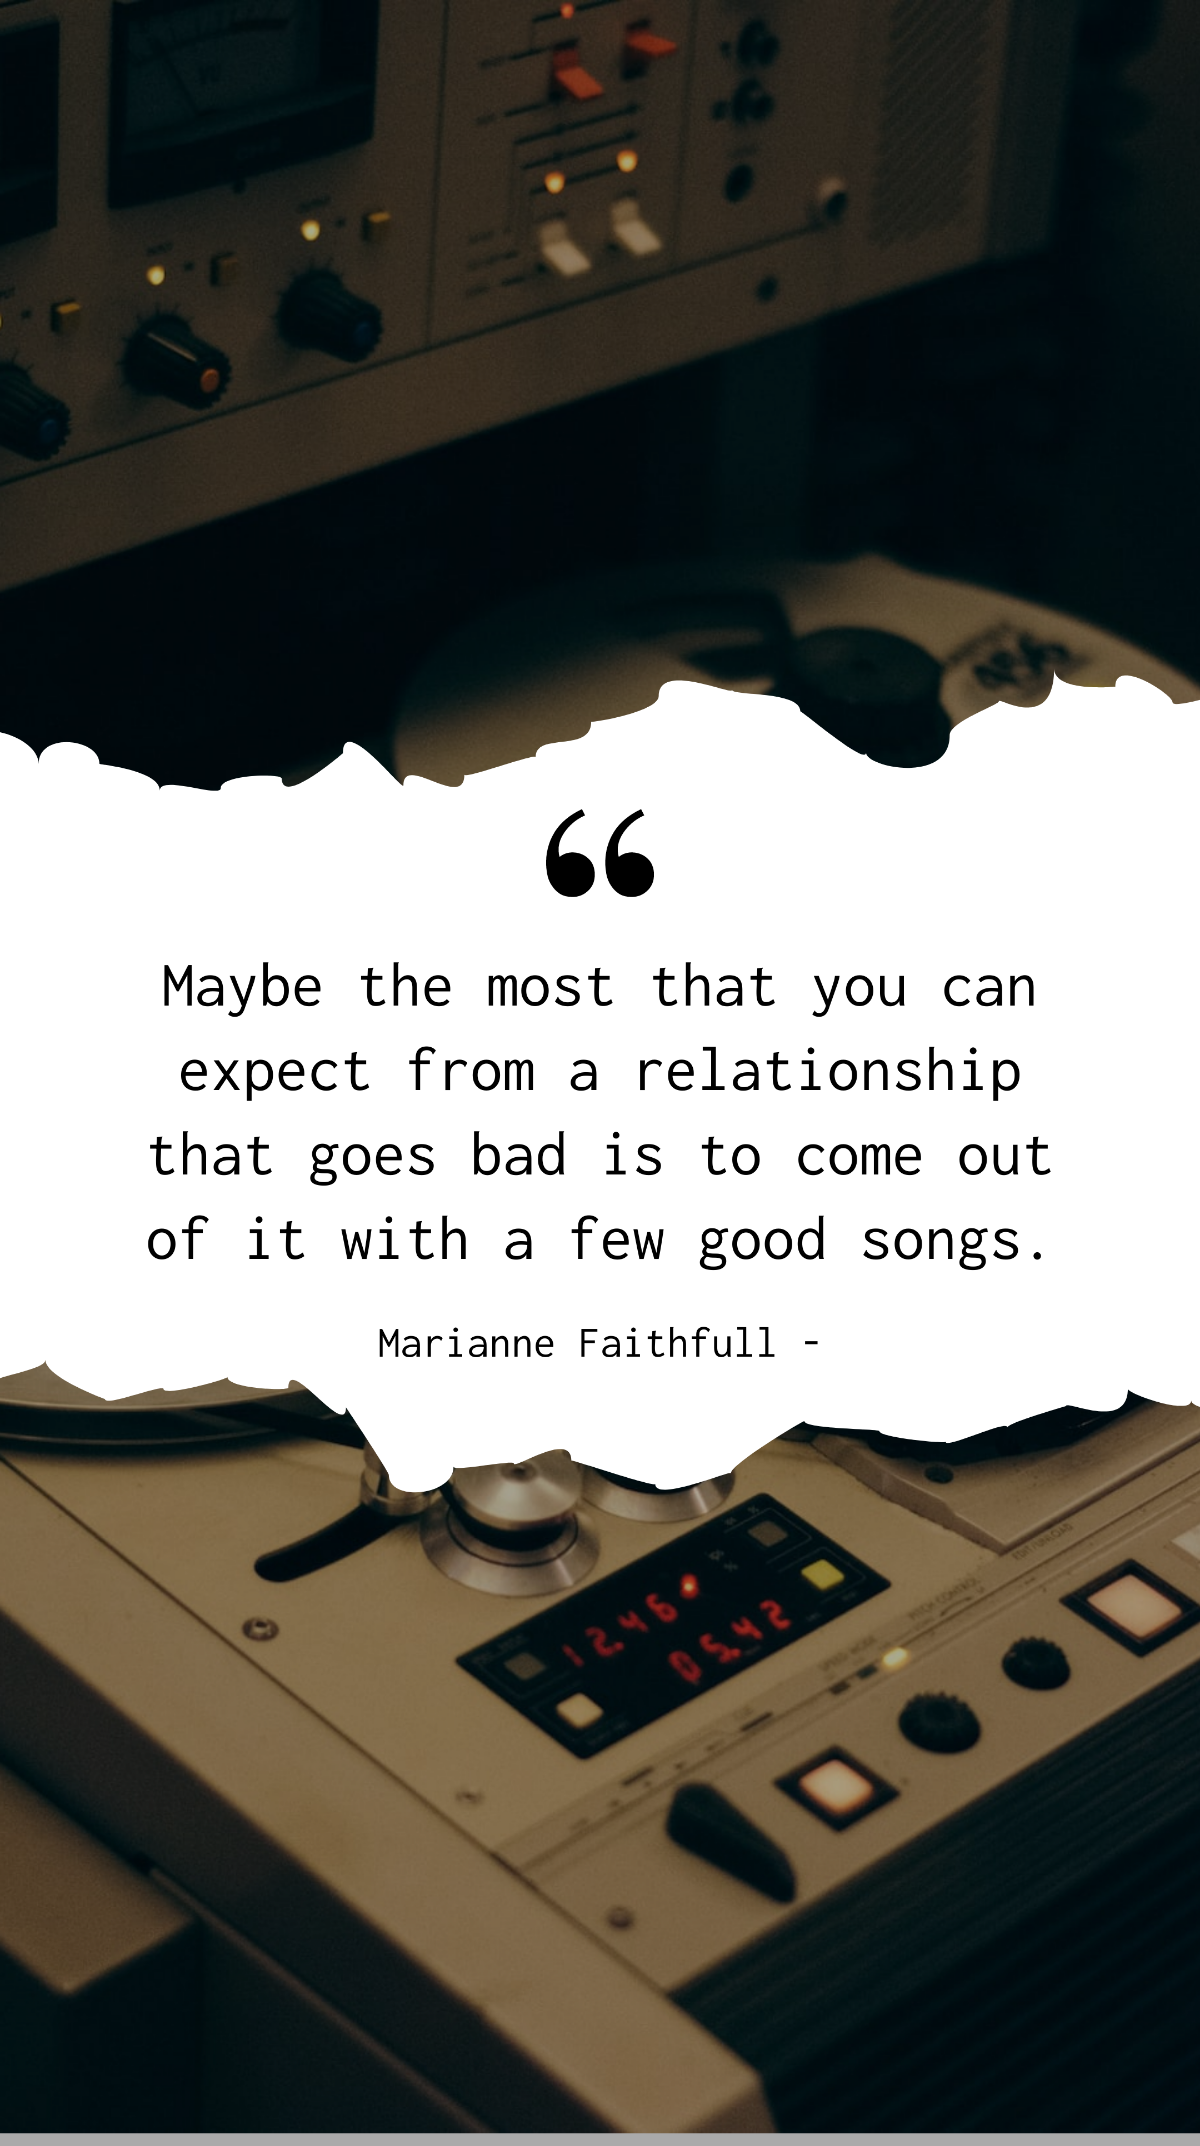 Marianne Faithfull - Maybe the most that you can expect from a relationship that goes bad is to come out of it with a few good songs. Template